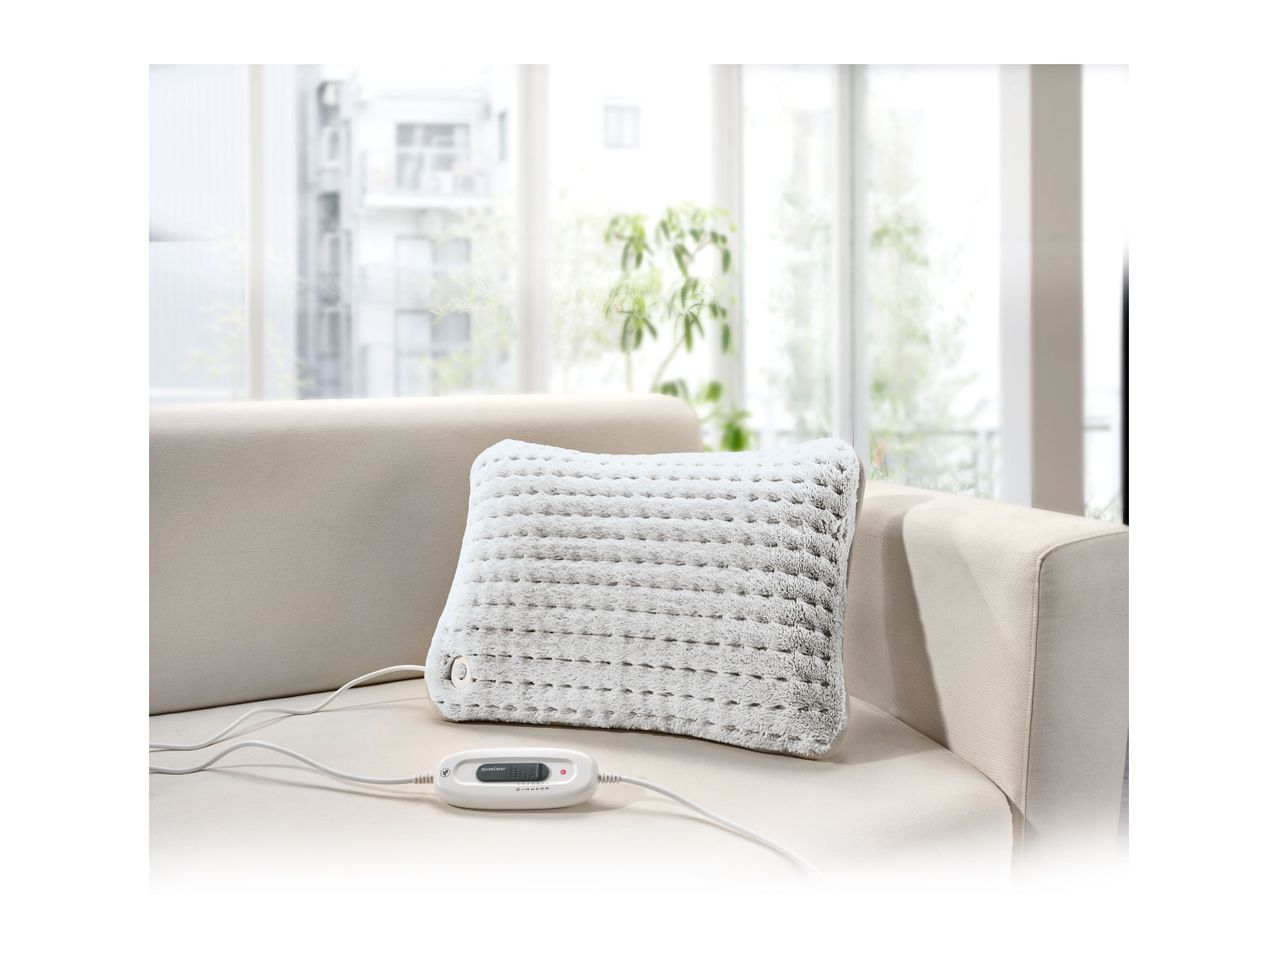 Go to full screen view: Silvercrest Heated Electric Cushion - Image 4